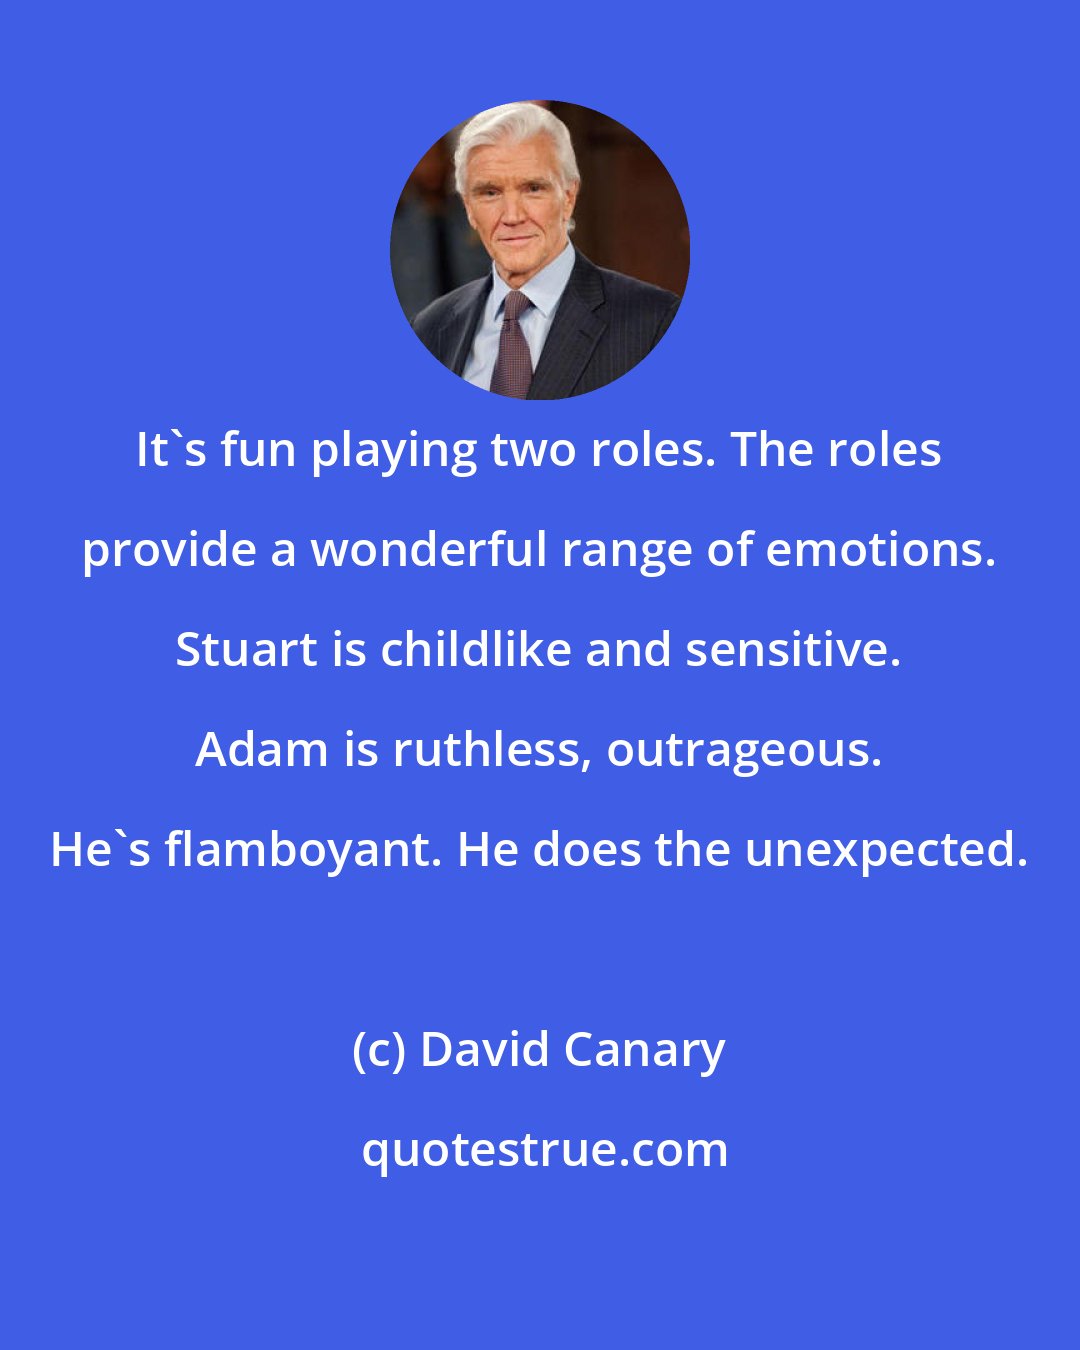 David Canary: It's fun playing two roles. The roles provide a wonderful range of emotions. Stuart is childlike and sensitive. Adam is ruthless, outrageous. He's flamboyant. He does the unexpected.